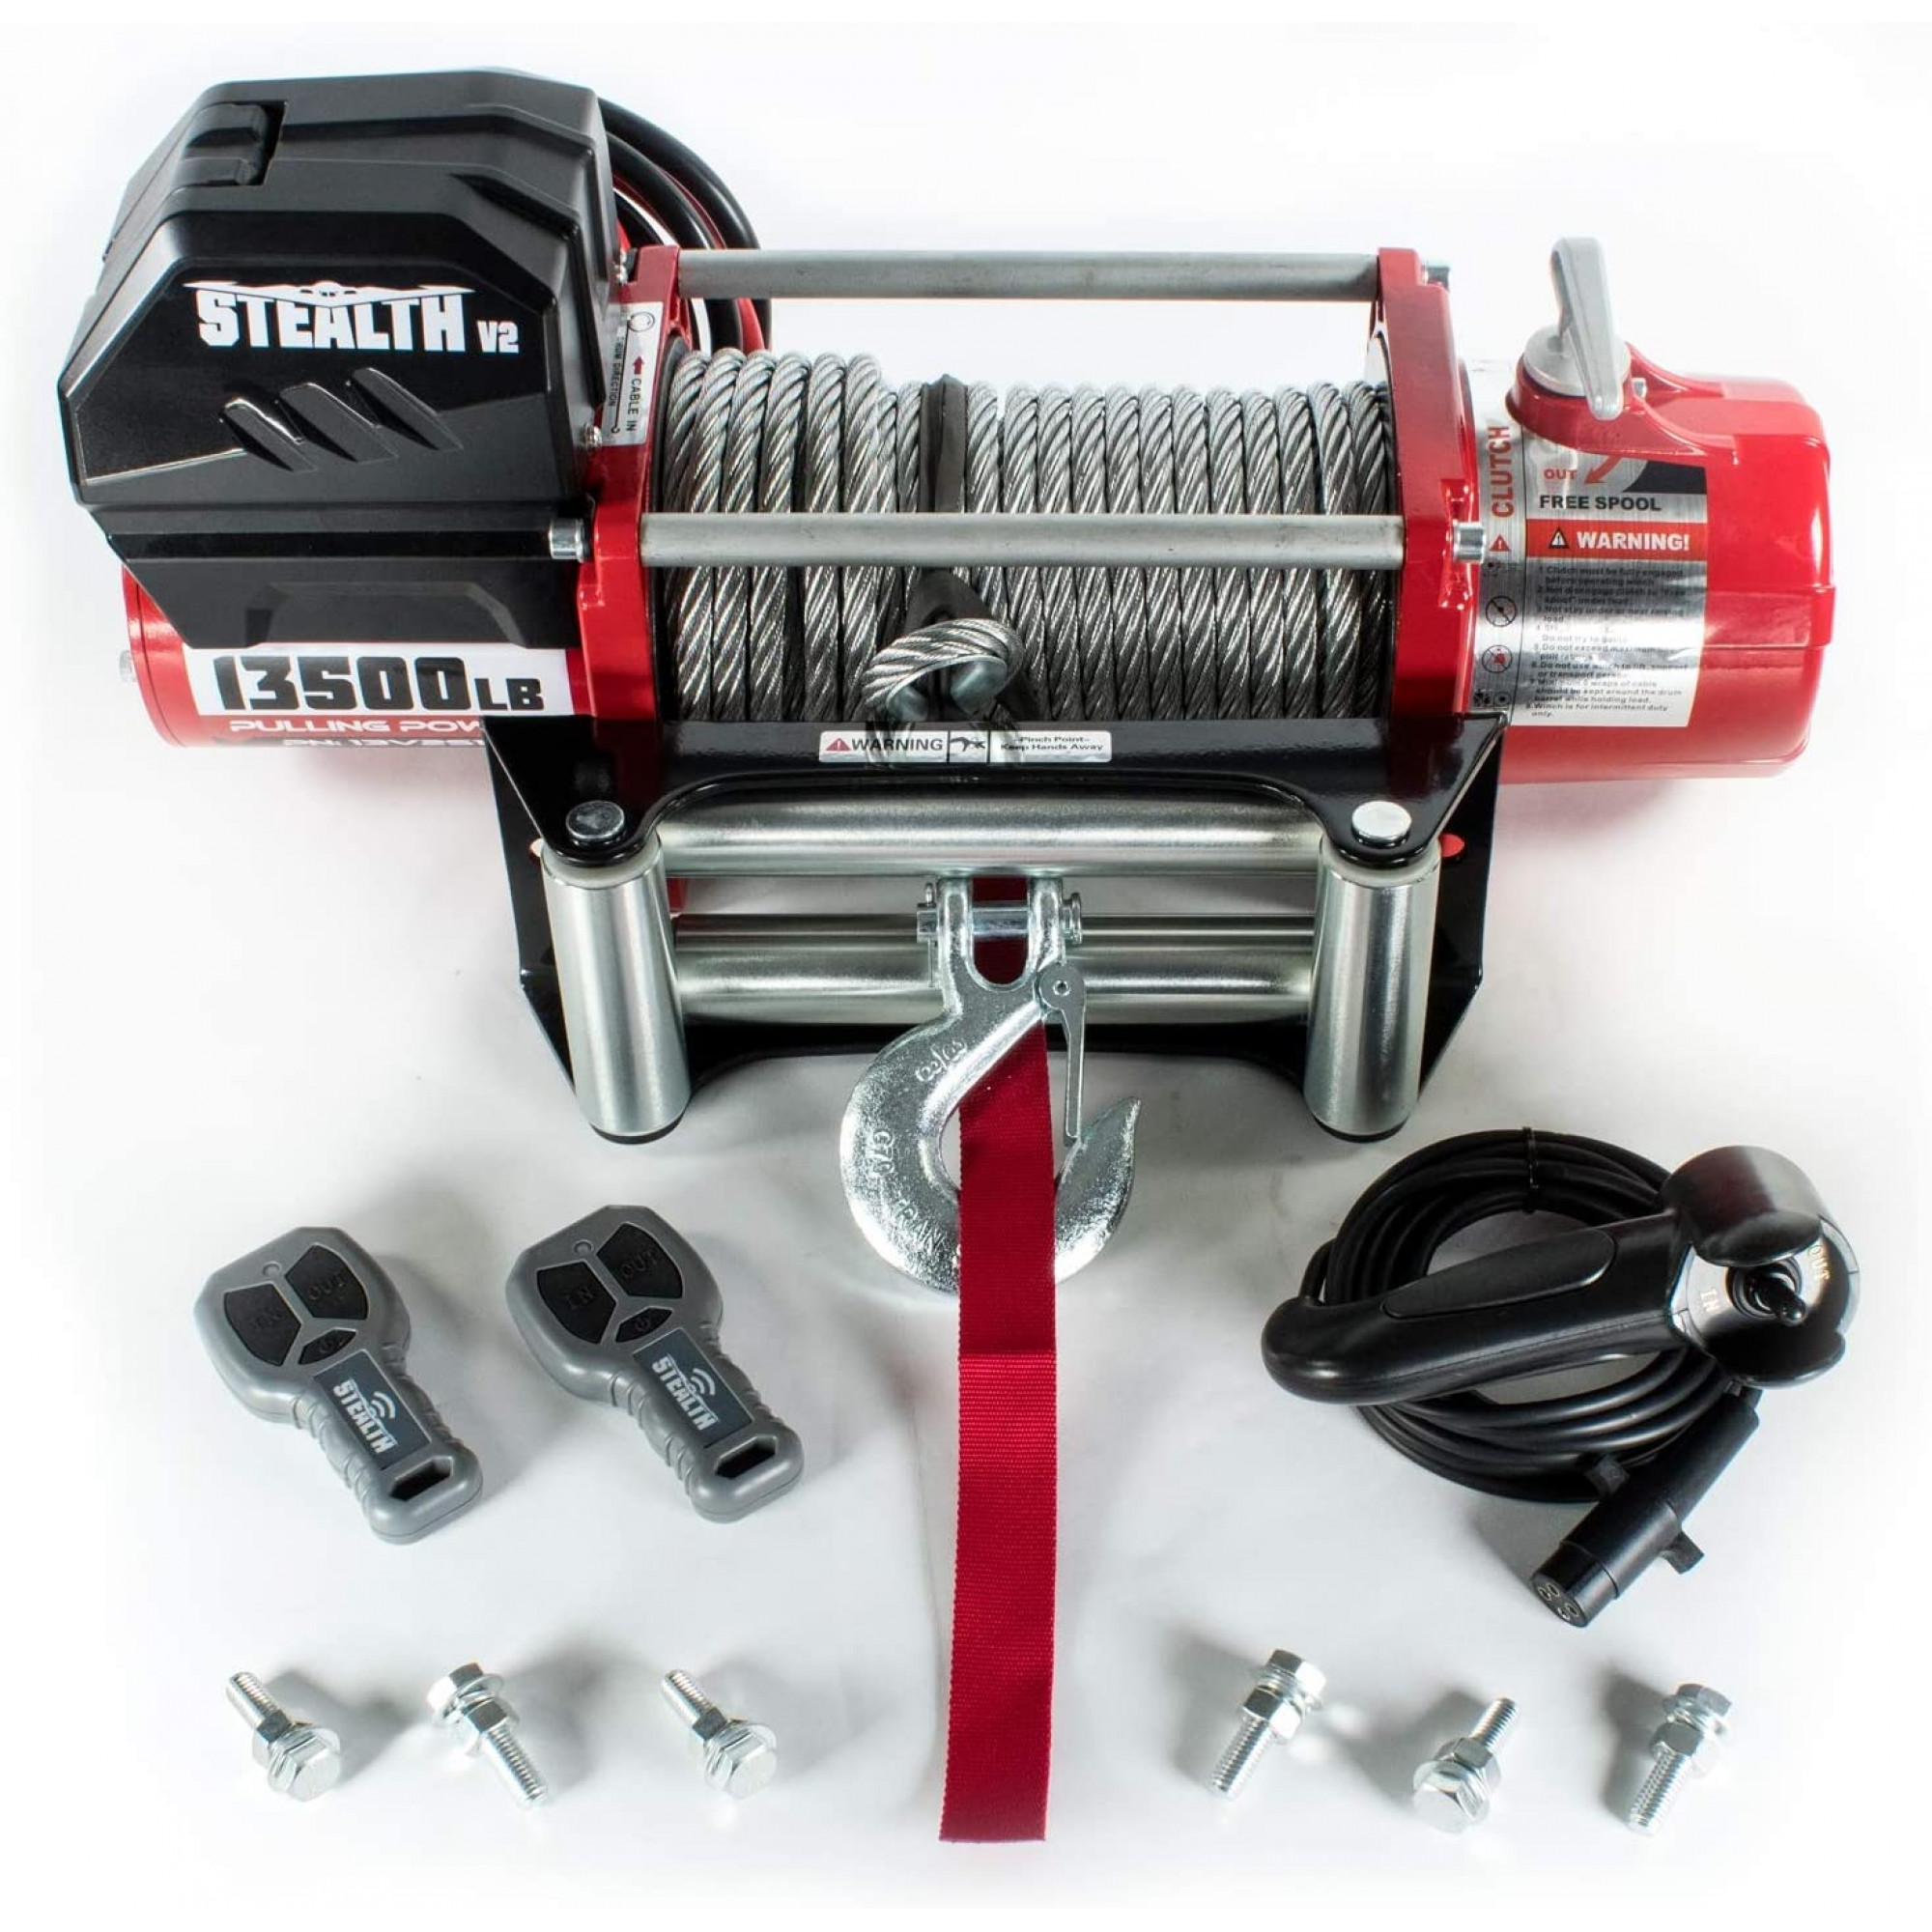 Stealth V2 13500LB 12V Winch - Steel Rope Complete with Wired and Wireless Remote